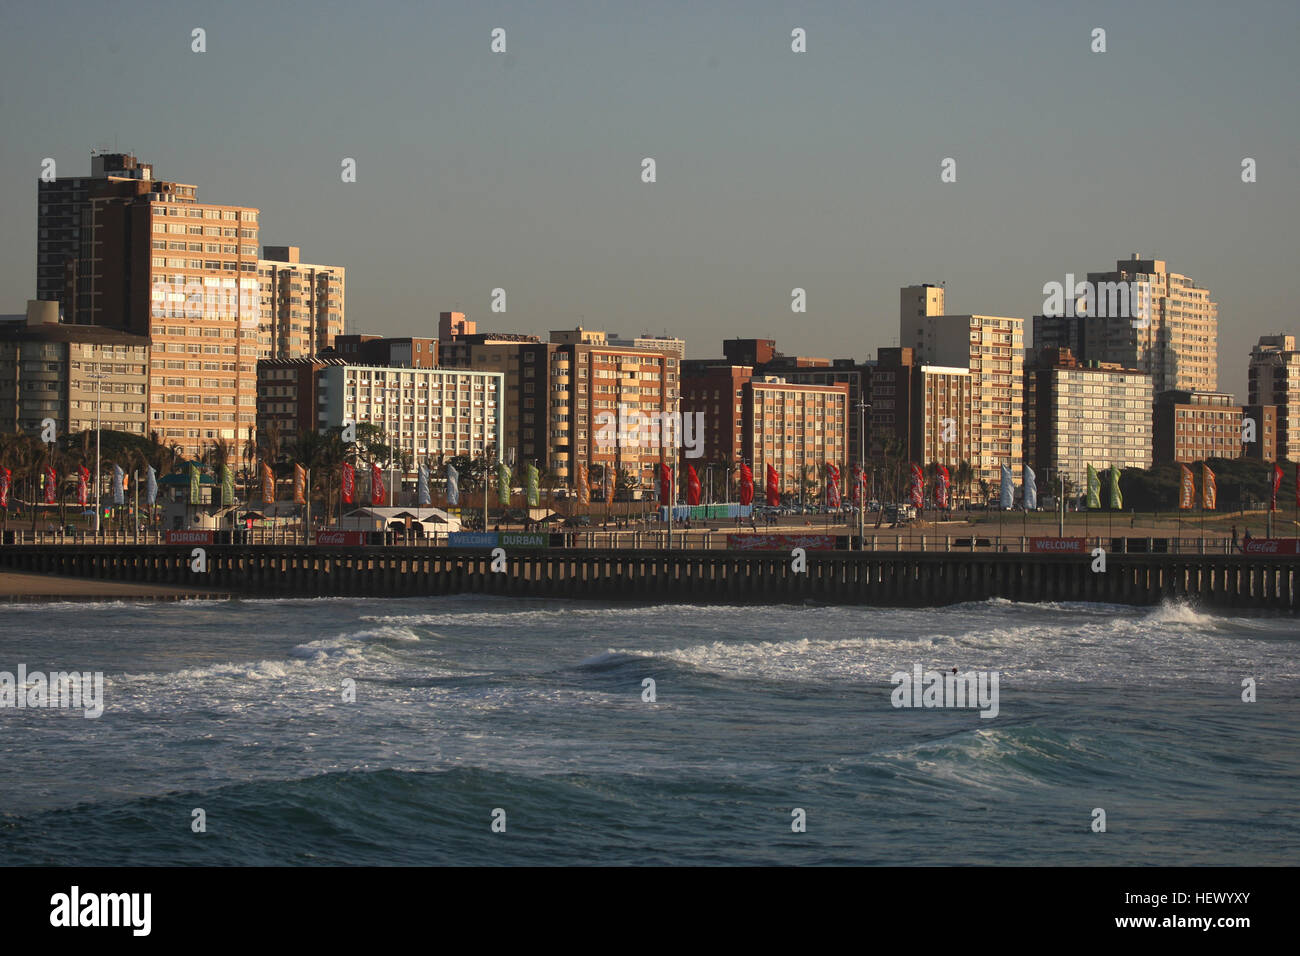 DURBAN, SOUTH AFRICA - NORTH BEACH DURBAN SURF AND STADIUM IMAGES. (Photo by Steve Haag) Stock Photo